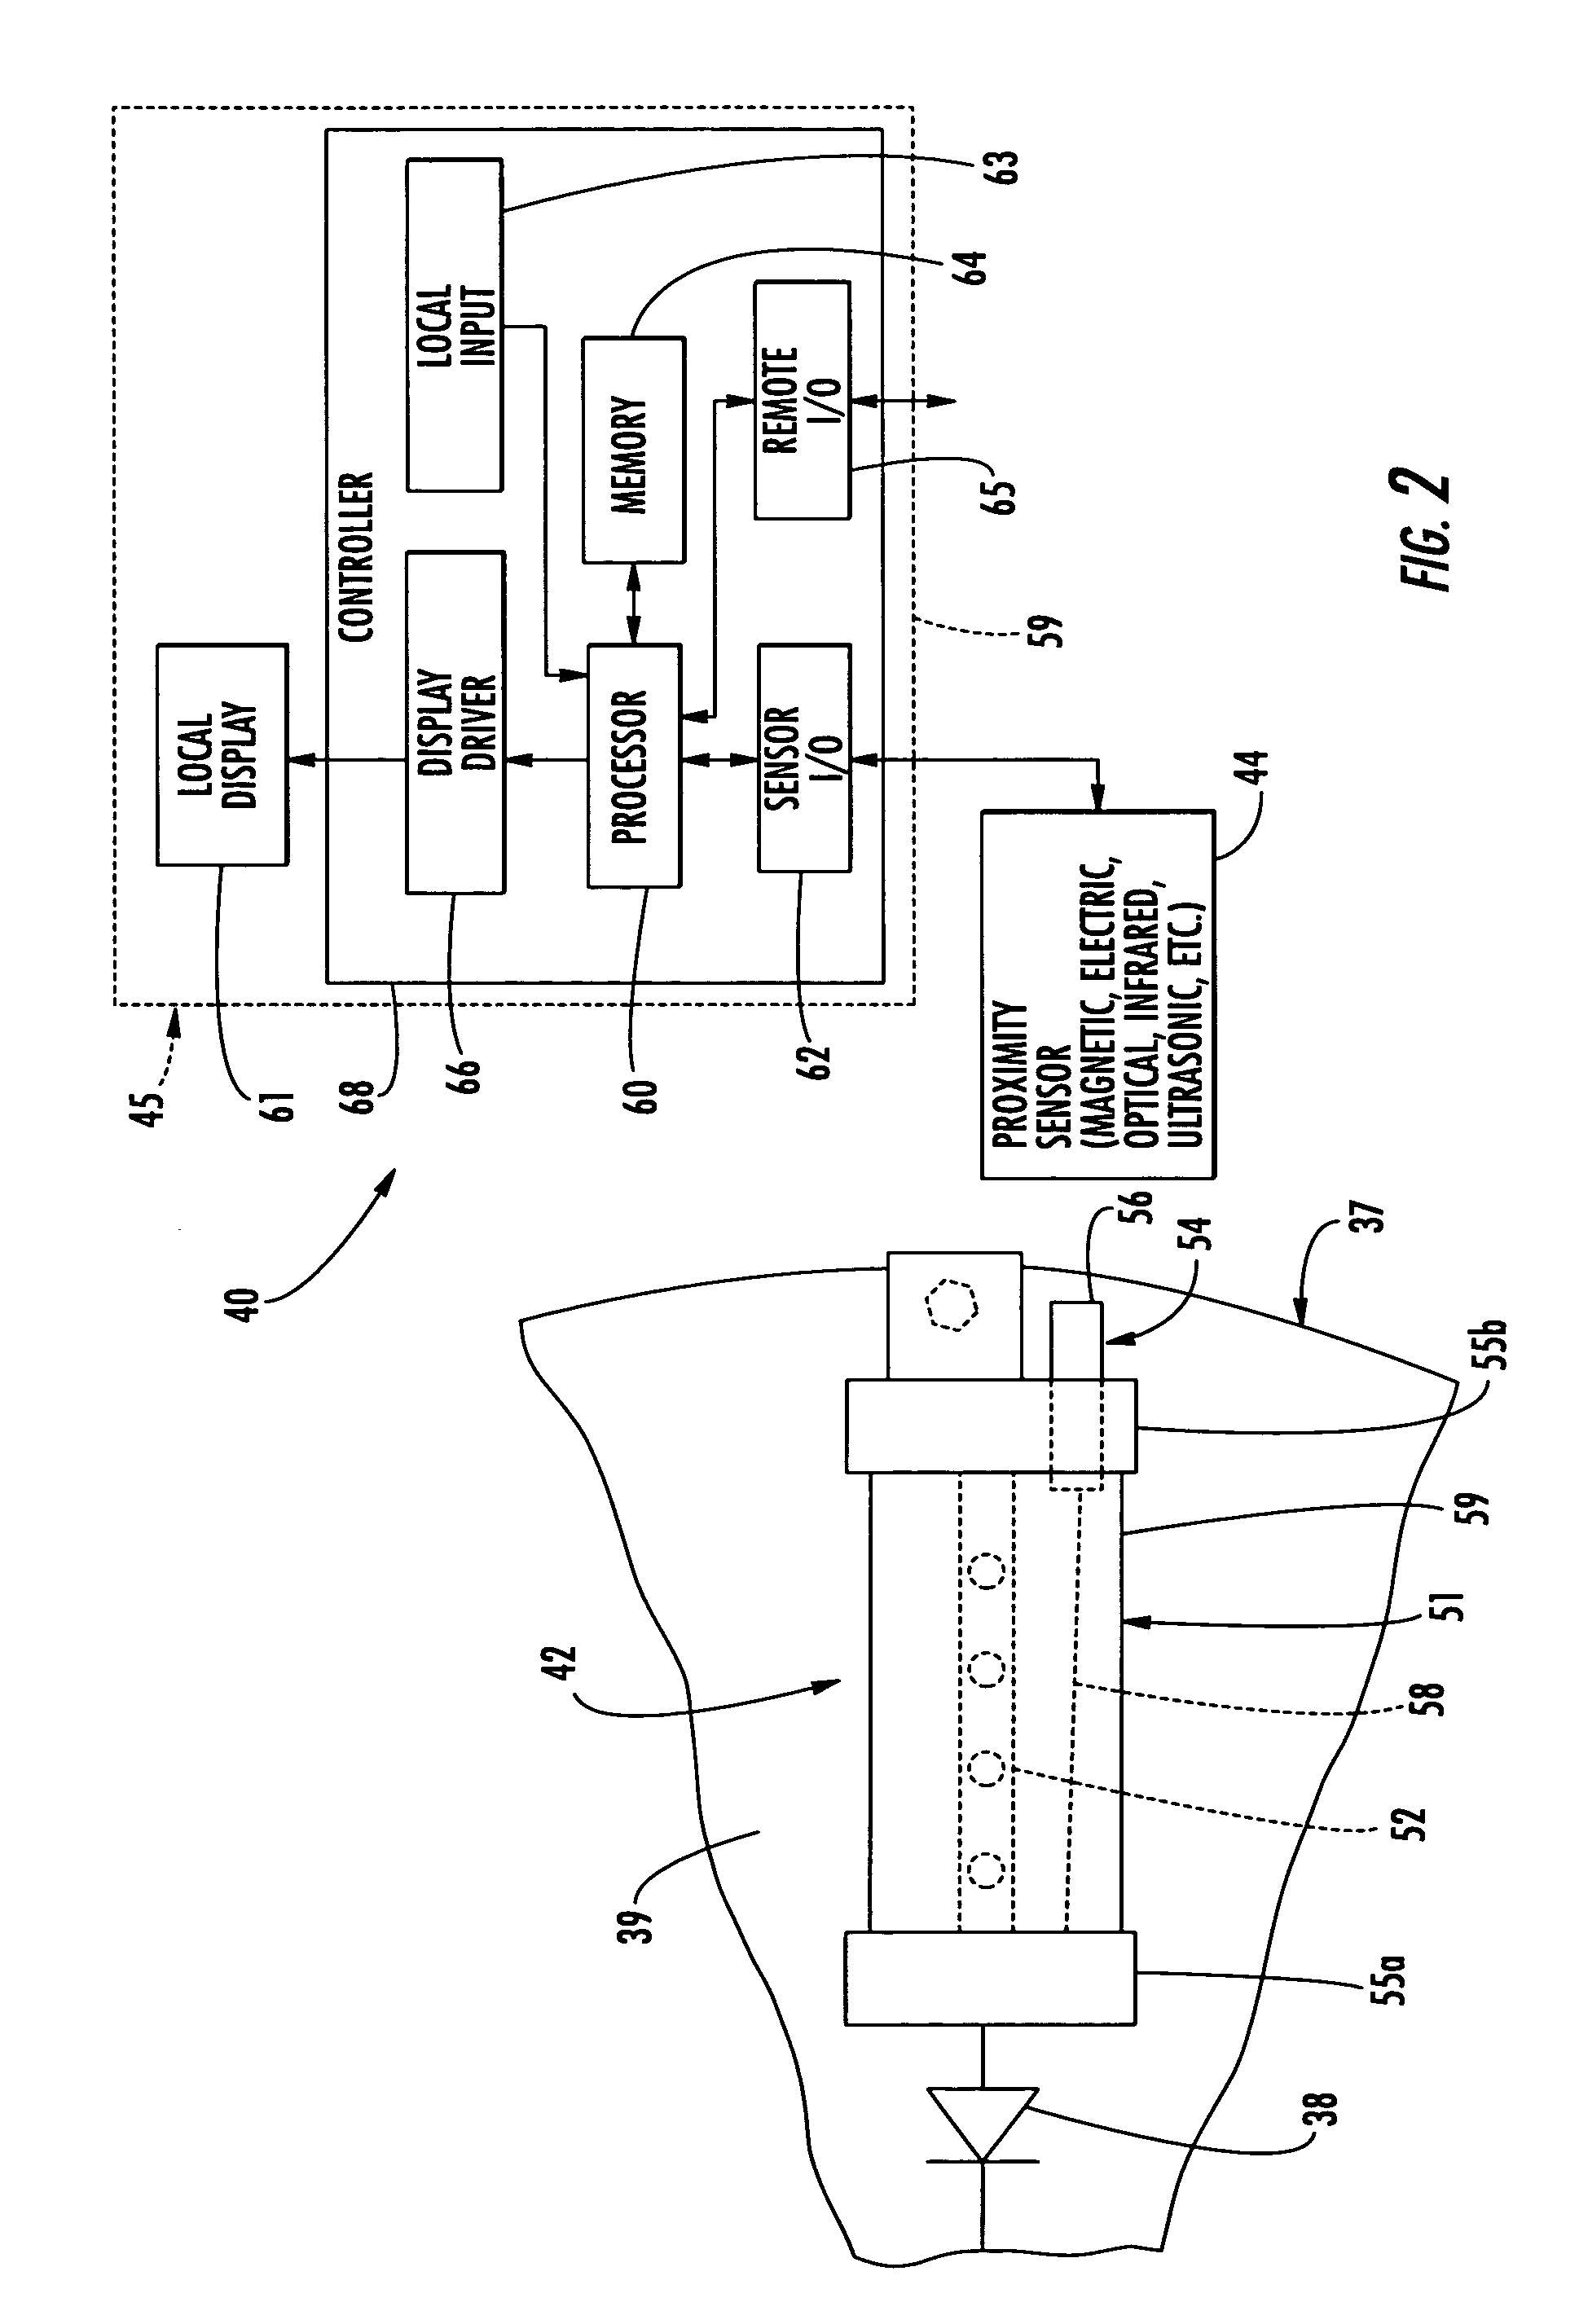 Sensing apparatus for blown fuse of rectifying wheel and associated methods